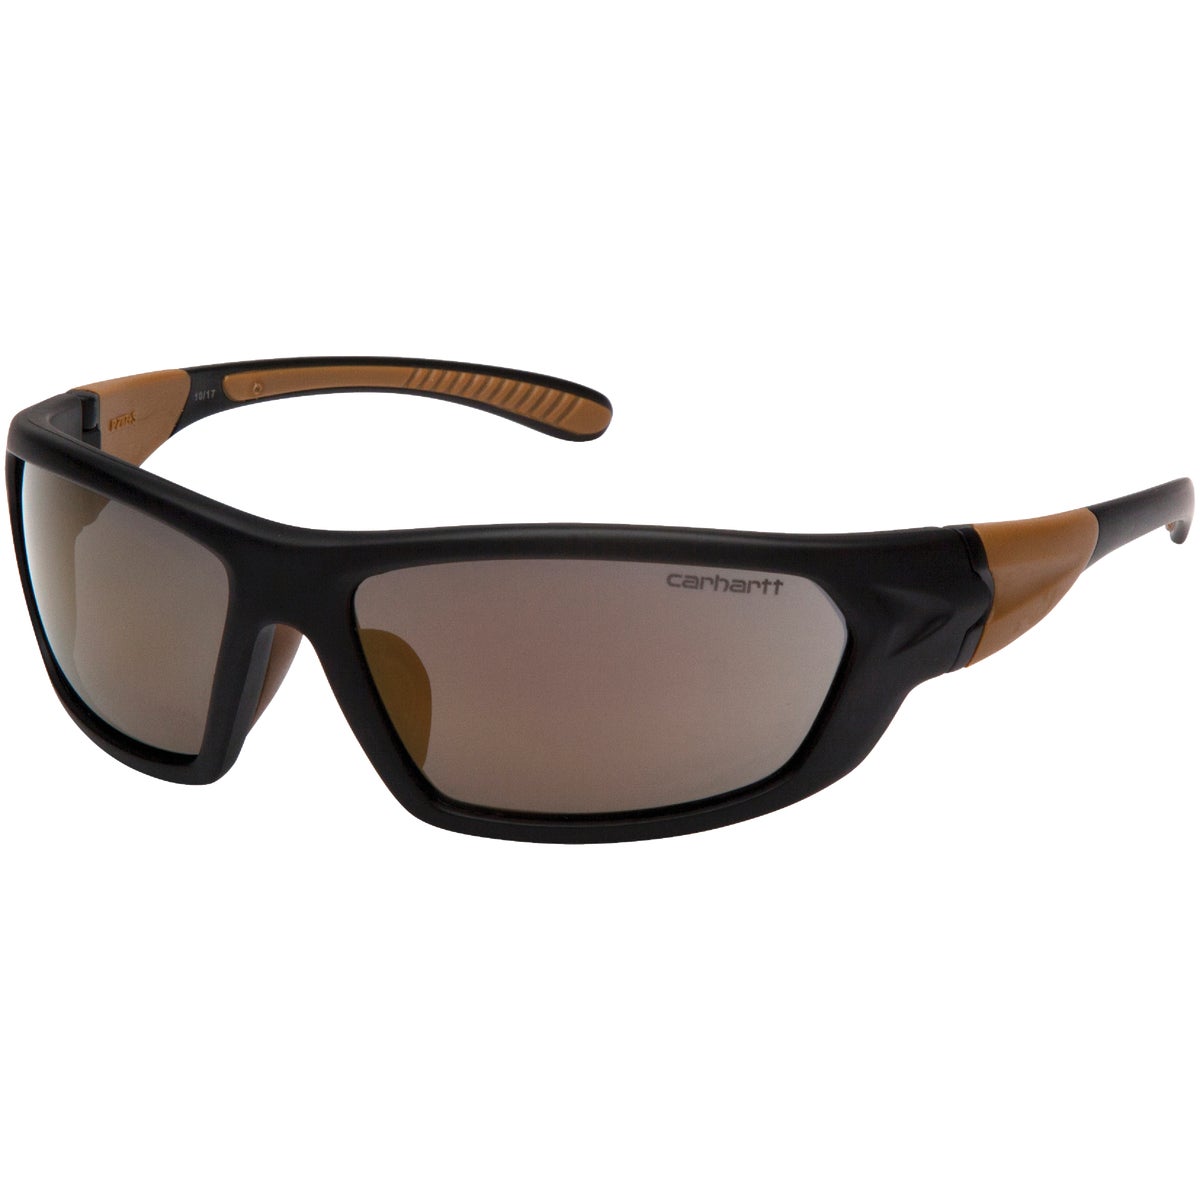 Carhartt Carbondale Black & Tan Frame Safety Glasses with Antique Mirror Lenses